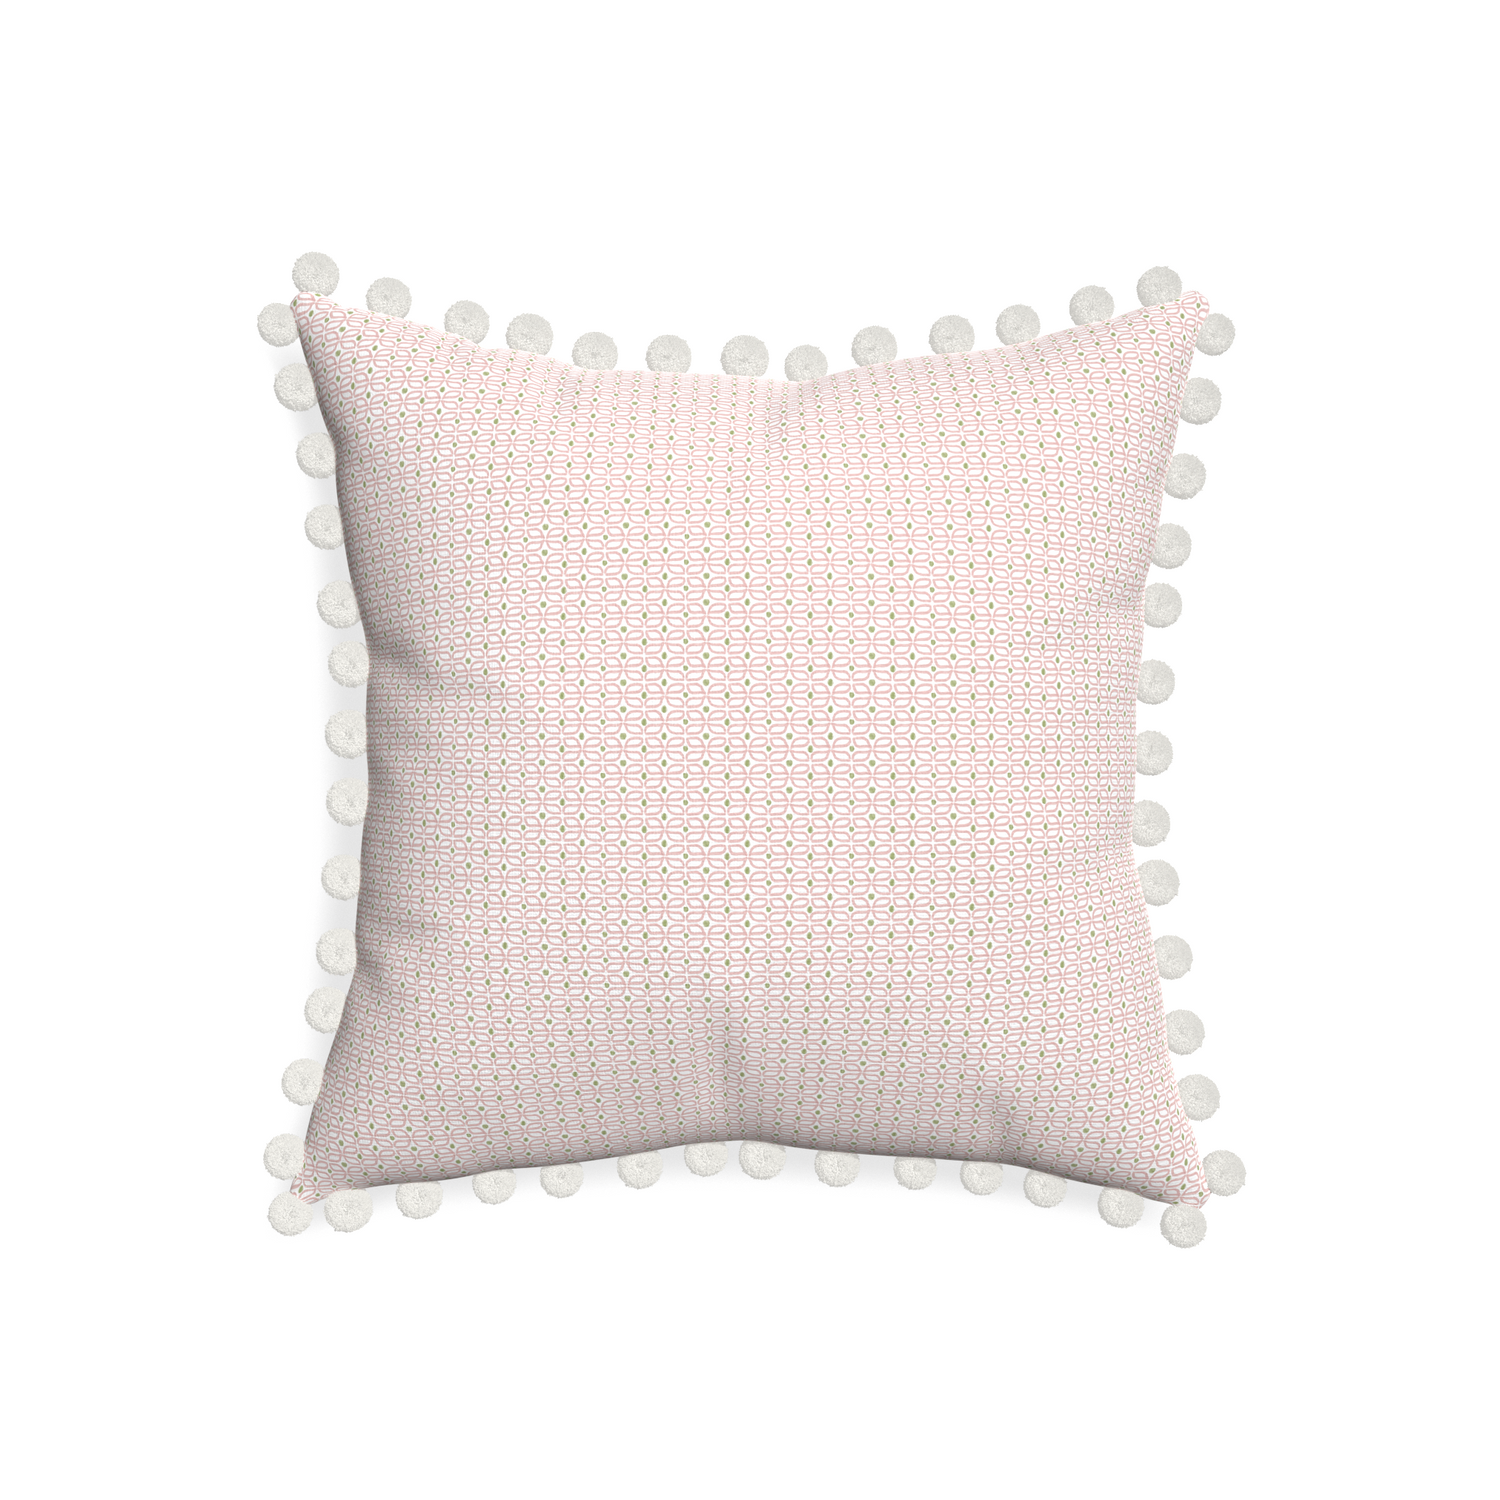 20-square loomi pink custom pillow with snow pom pom on white background